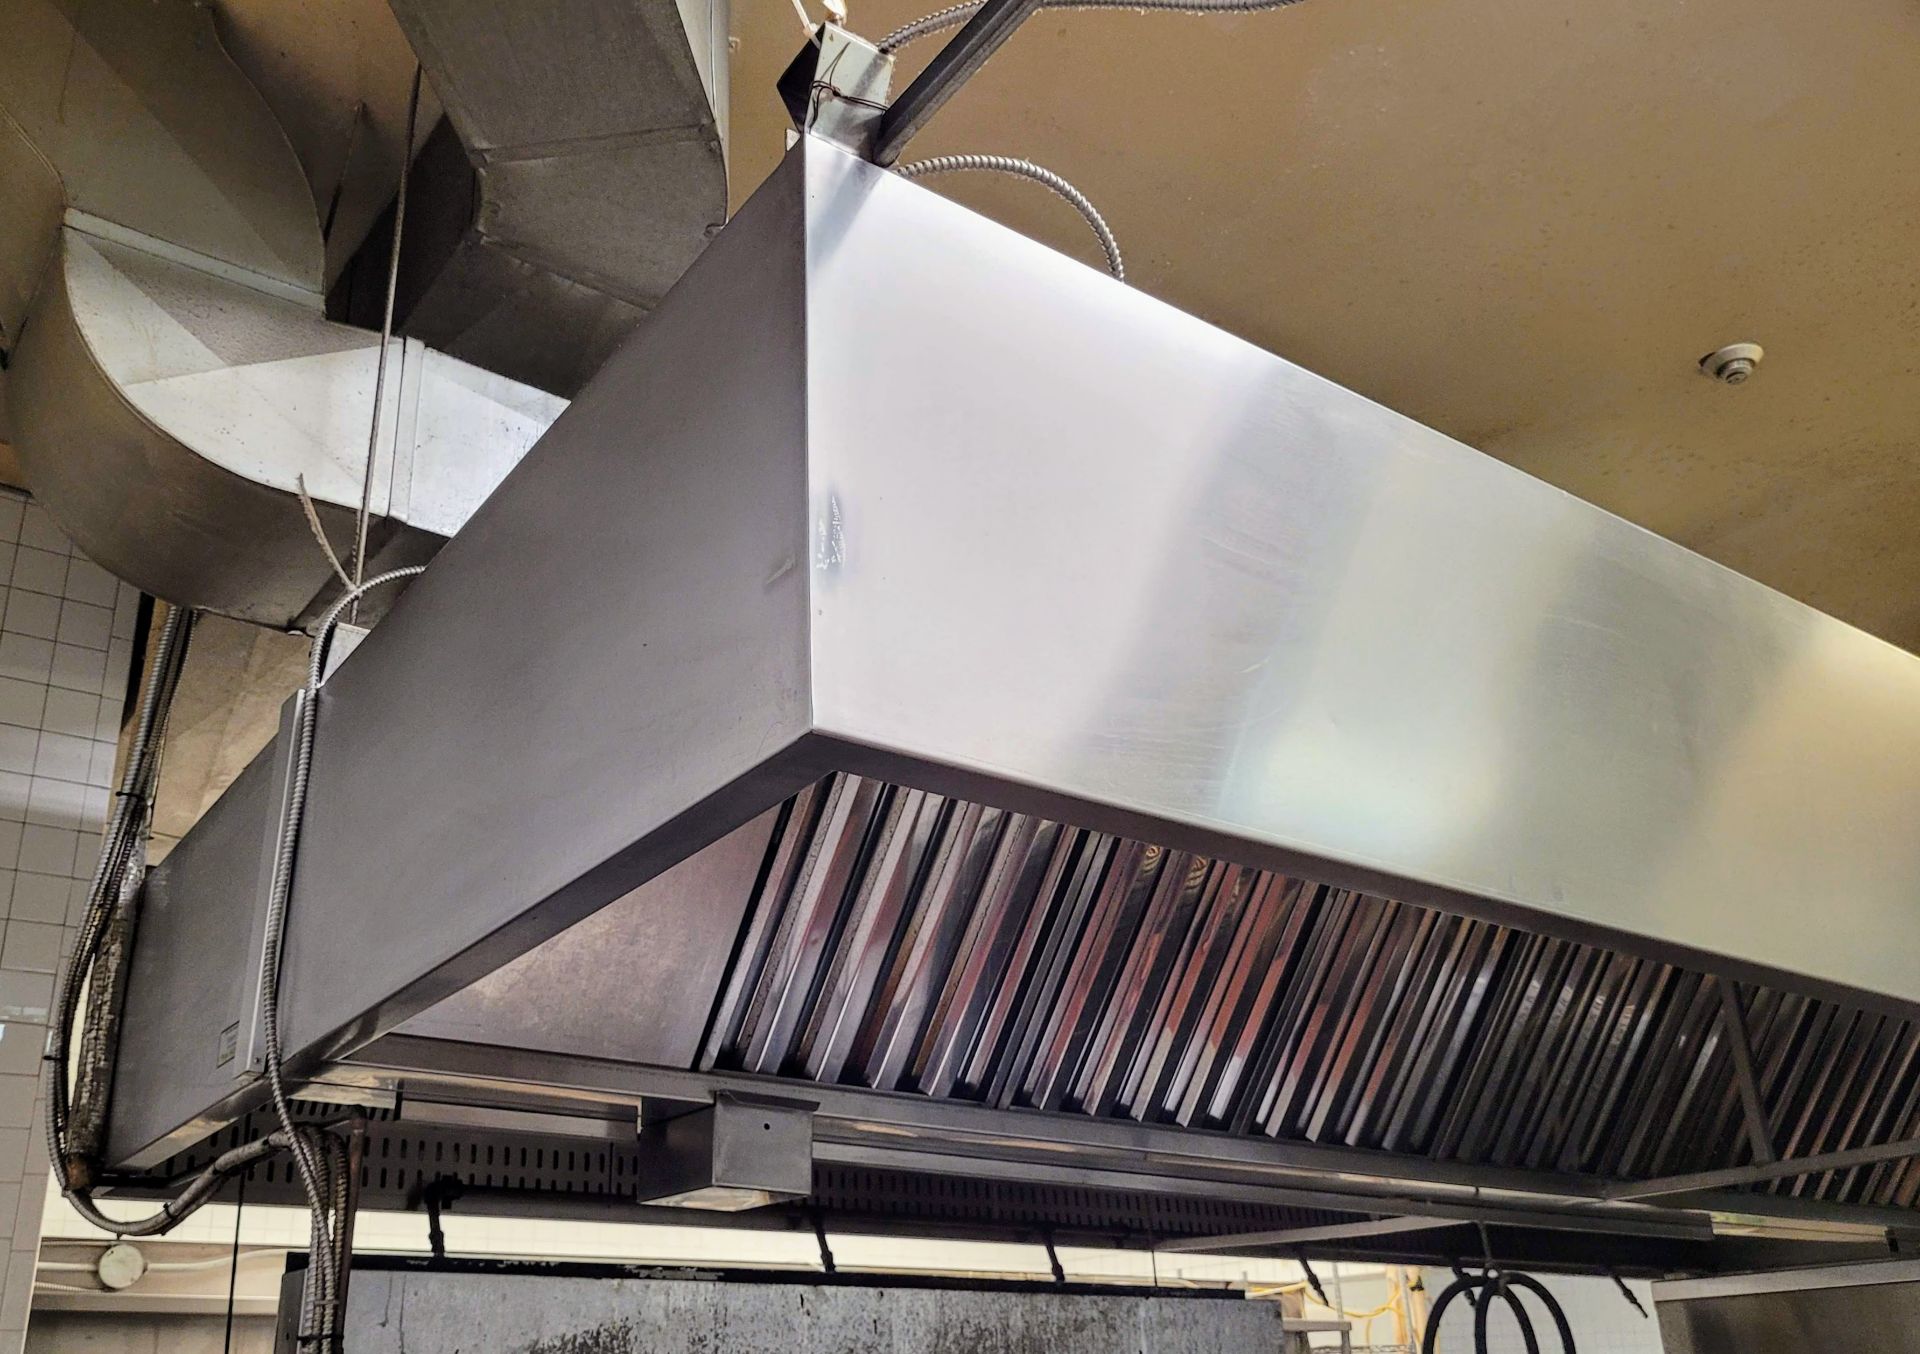 STAINLESS STEEL EXHAUST HOOD W/ FIRE SUPPRESSION, APPROX 20'L X 10'W - Image 4 of 4